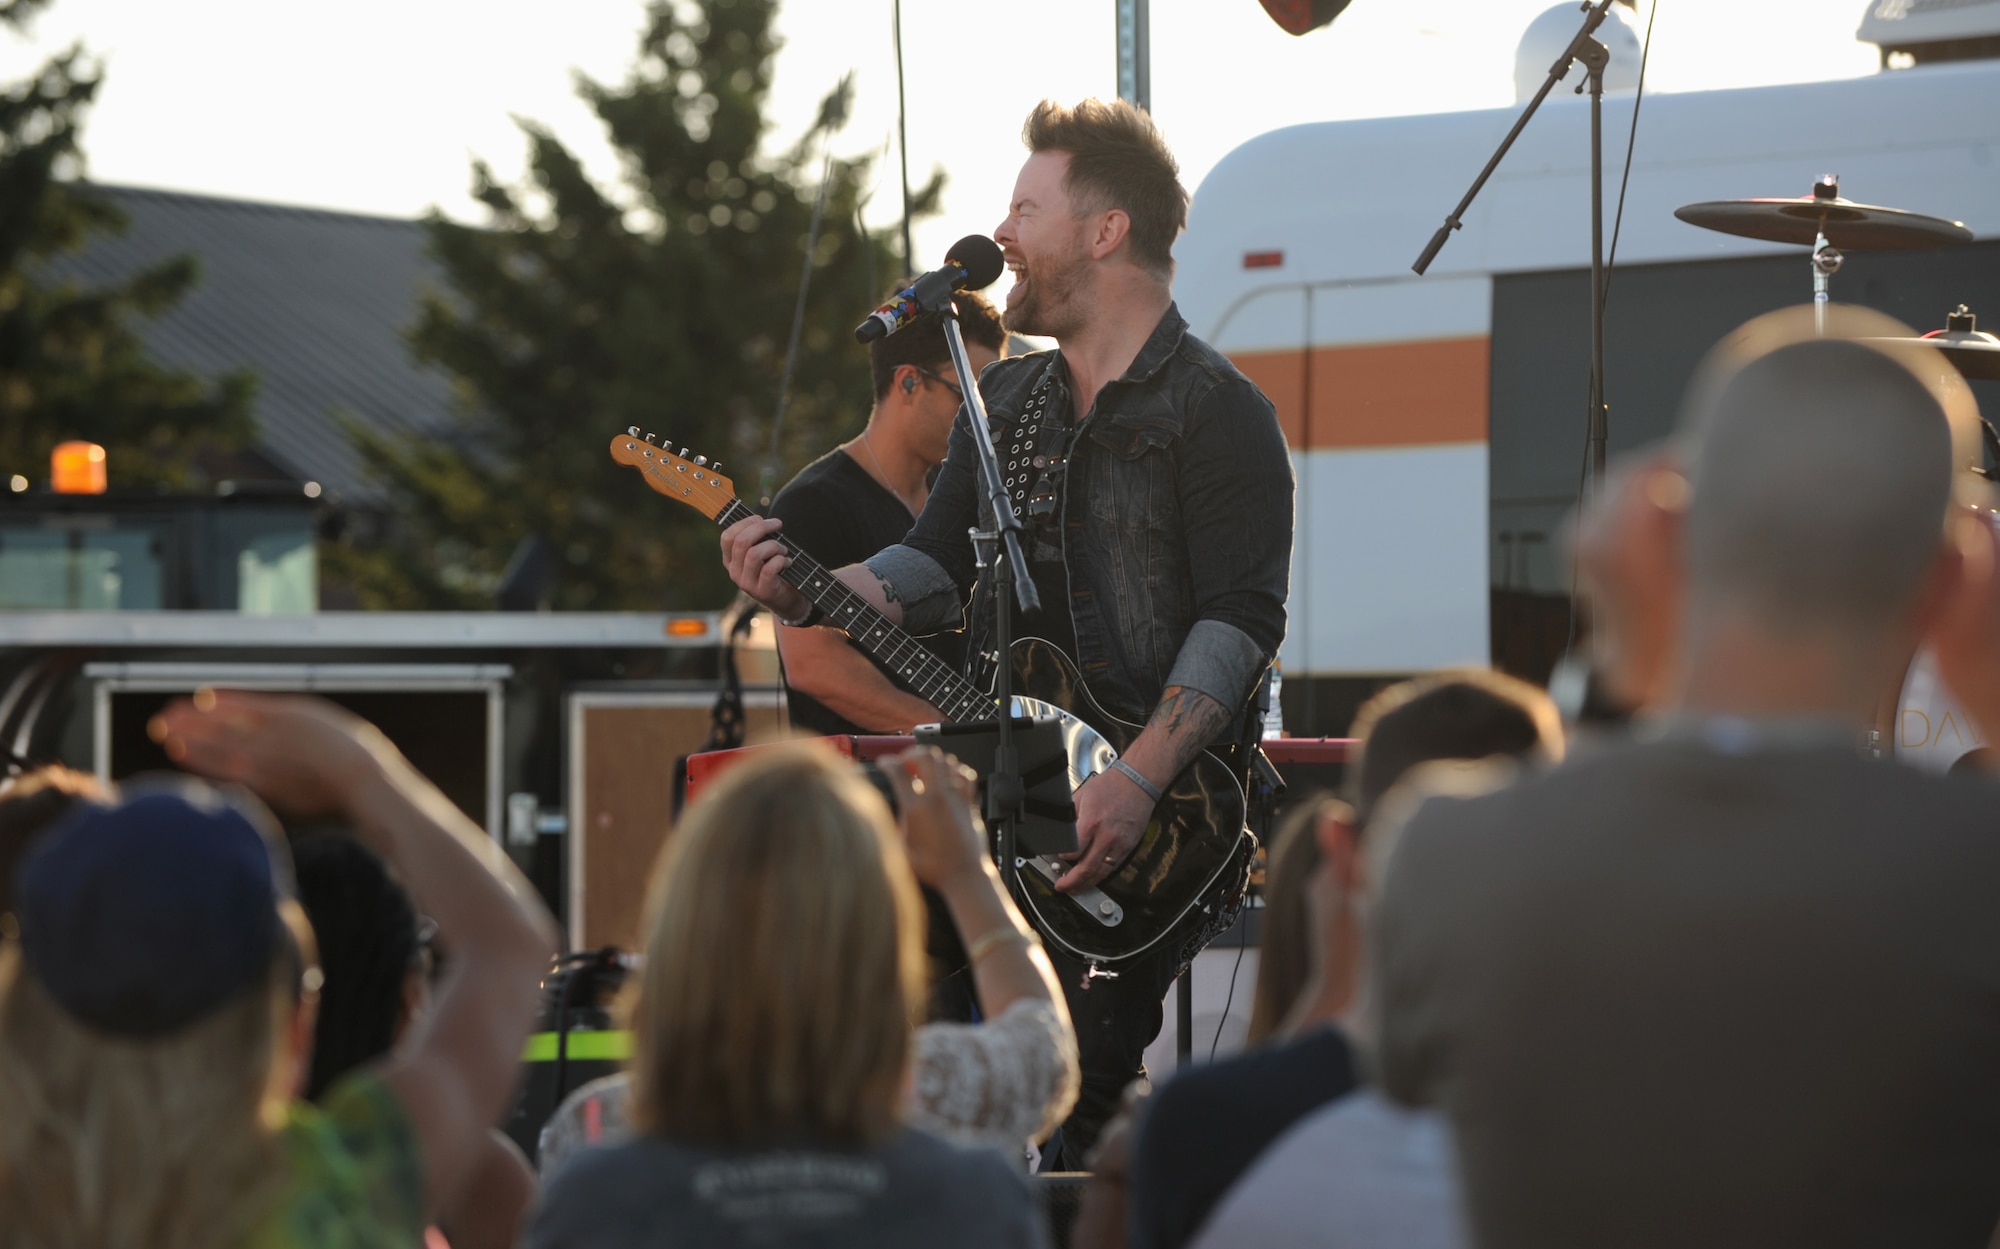 David Cook, center, winner of season seven of American Idol, performs a free concert for Airmen and their families at the Dakota’s Club at Ellsworth Air Force Base, S.D., June 3, 2016. Cook said his tour was a way for him and his band to show their appreciation to U.S. servicemembers for the sacrifices they make. (U.S. Air Force photo by Airman 1st Class Denise M. Nevins/Released)